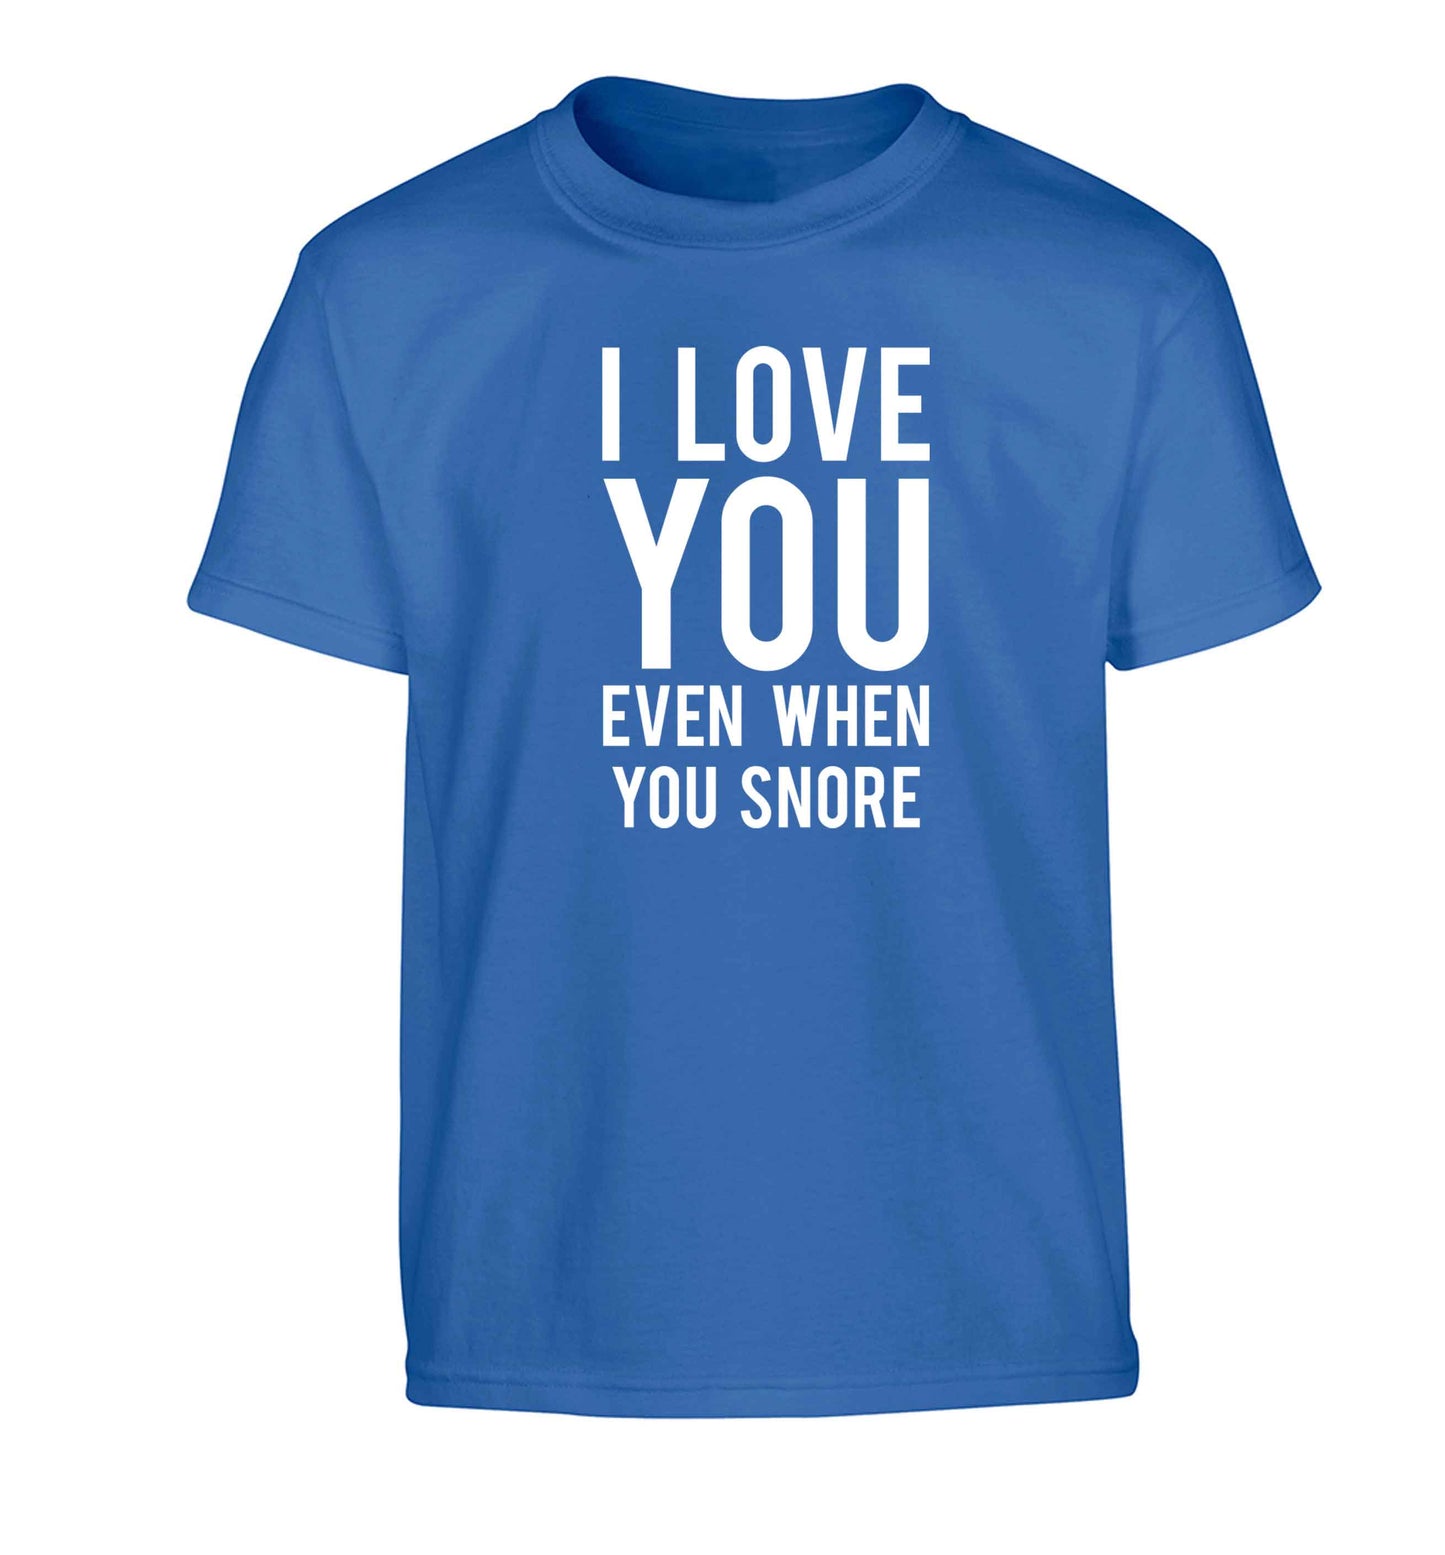 I love you even when you snore Children's blue Tshirt 12-13 Years